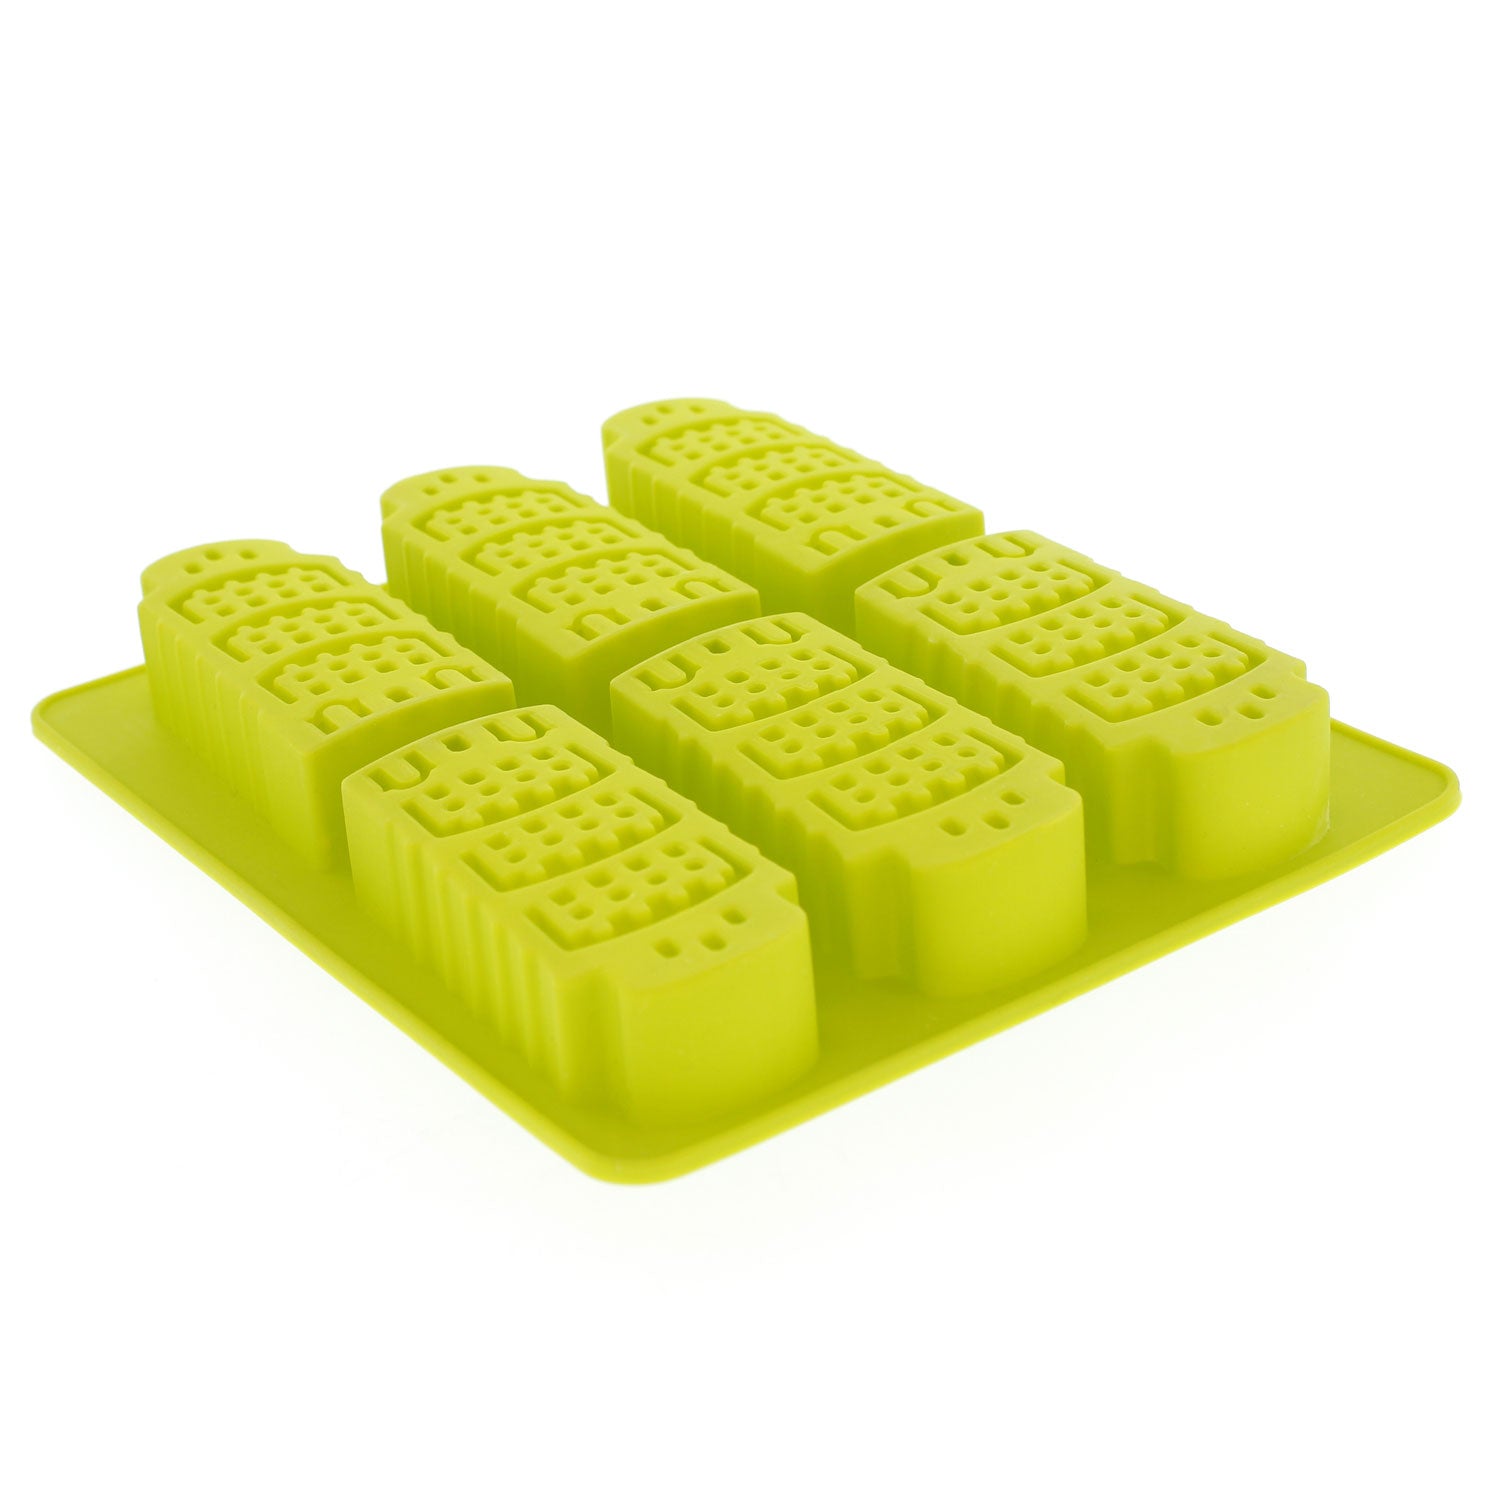 Elbee Home 6-Piece Silicone Leaning Tower of Pisa Tray for Making Homemade Ice, Candy, Chocolate, Gummy, Jello, and More.